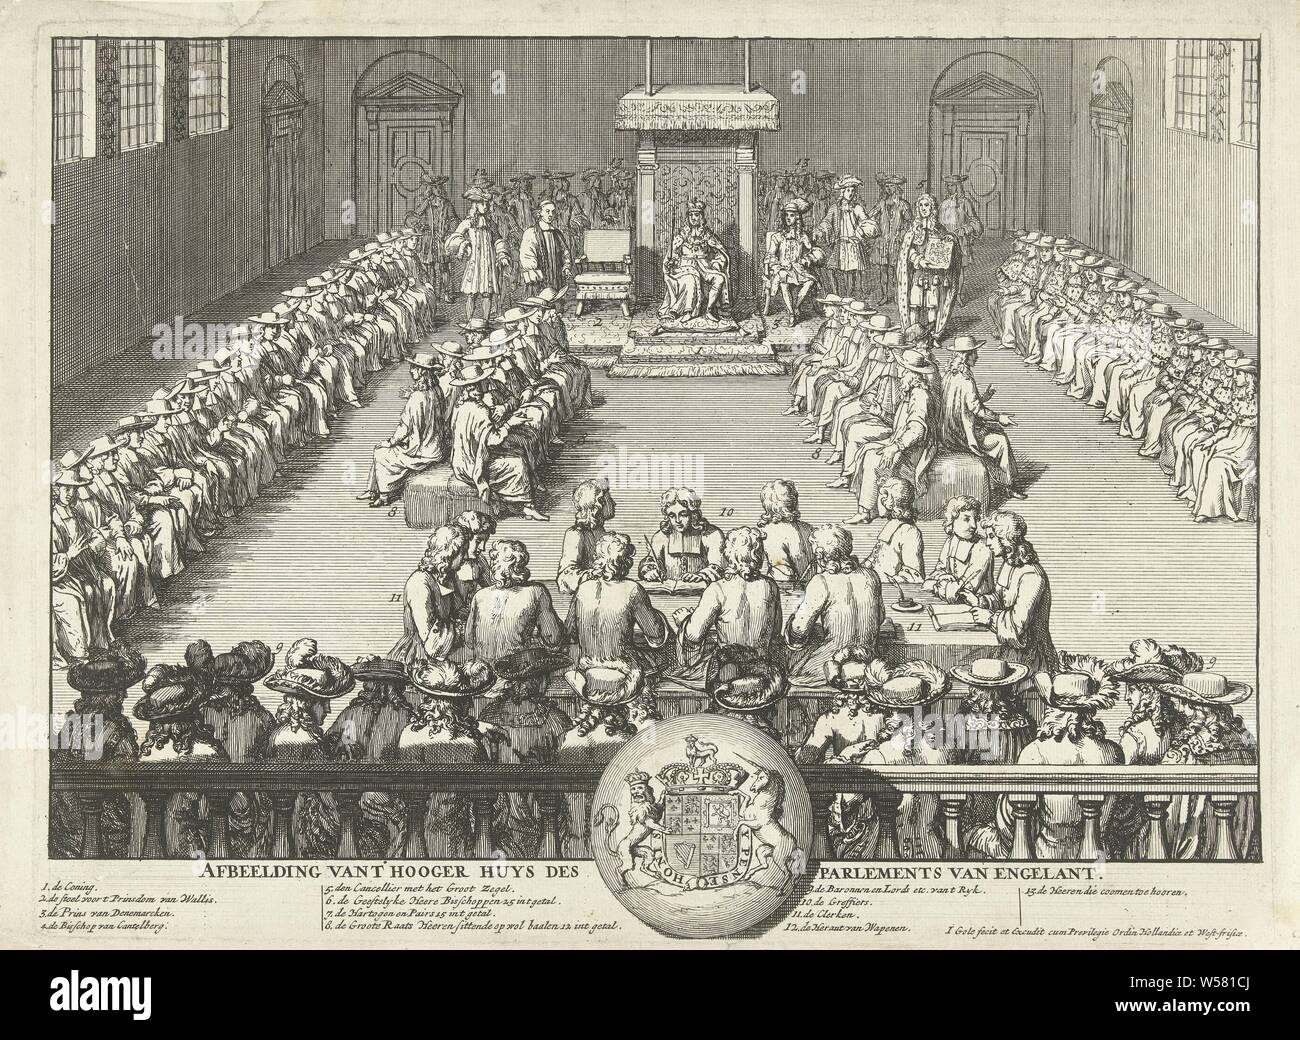 Session of the English House of Lords, 1689 Picture of t Hooger huys des parliament of Engelant (title on object), A session of the House of Lords is attended by a king. Central the king on his throne, surrounded by the Lords, sitting on cushions. In the front the clerks around a table. In the caption the legend 1-13 and the British royal weapon. The performance is based on a performance in which King William III attends the meeting, 1689., Upper House, Senate, Houses of Parliament (London), William III (Prince of Orange and King of England, Scotland and Ireland), Jacob Gole (mentioned Stock Photo